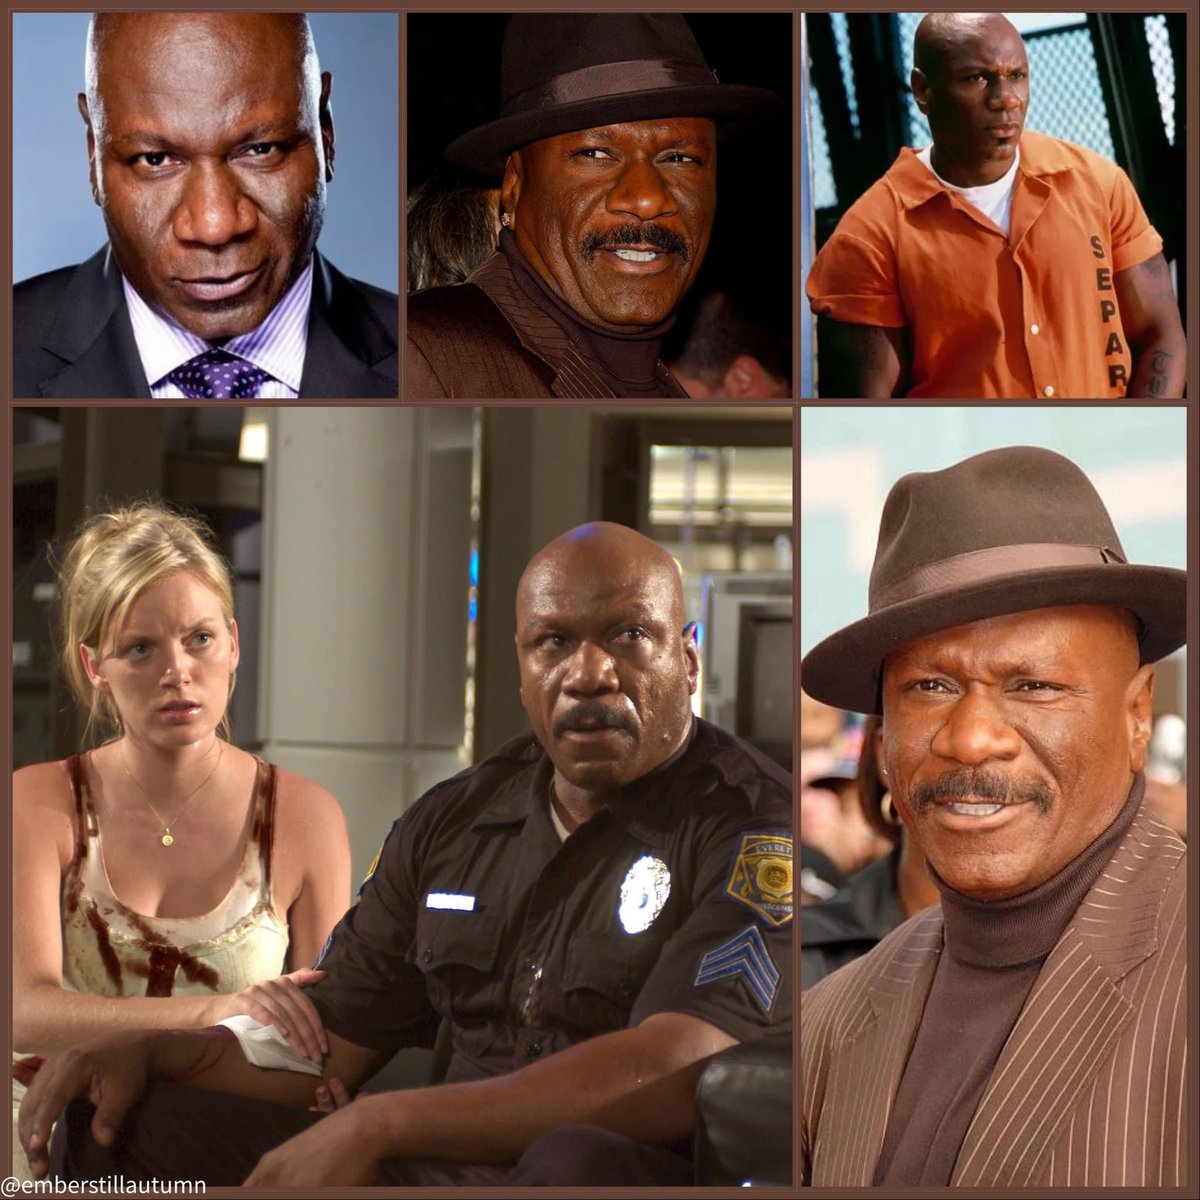 Ving Rhames was born on this day back in 1959. 

Happy Birthday Ving!

#vingrhames #dawnofthedead #pulpfiction #conair